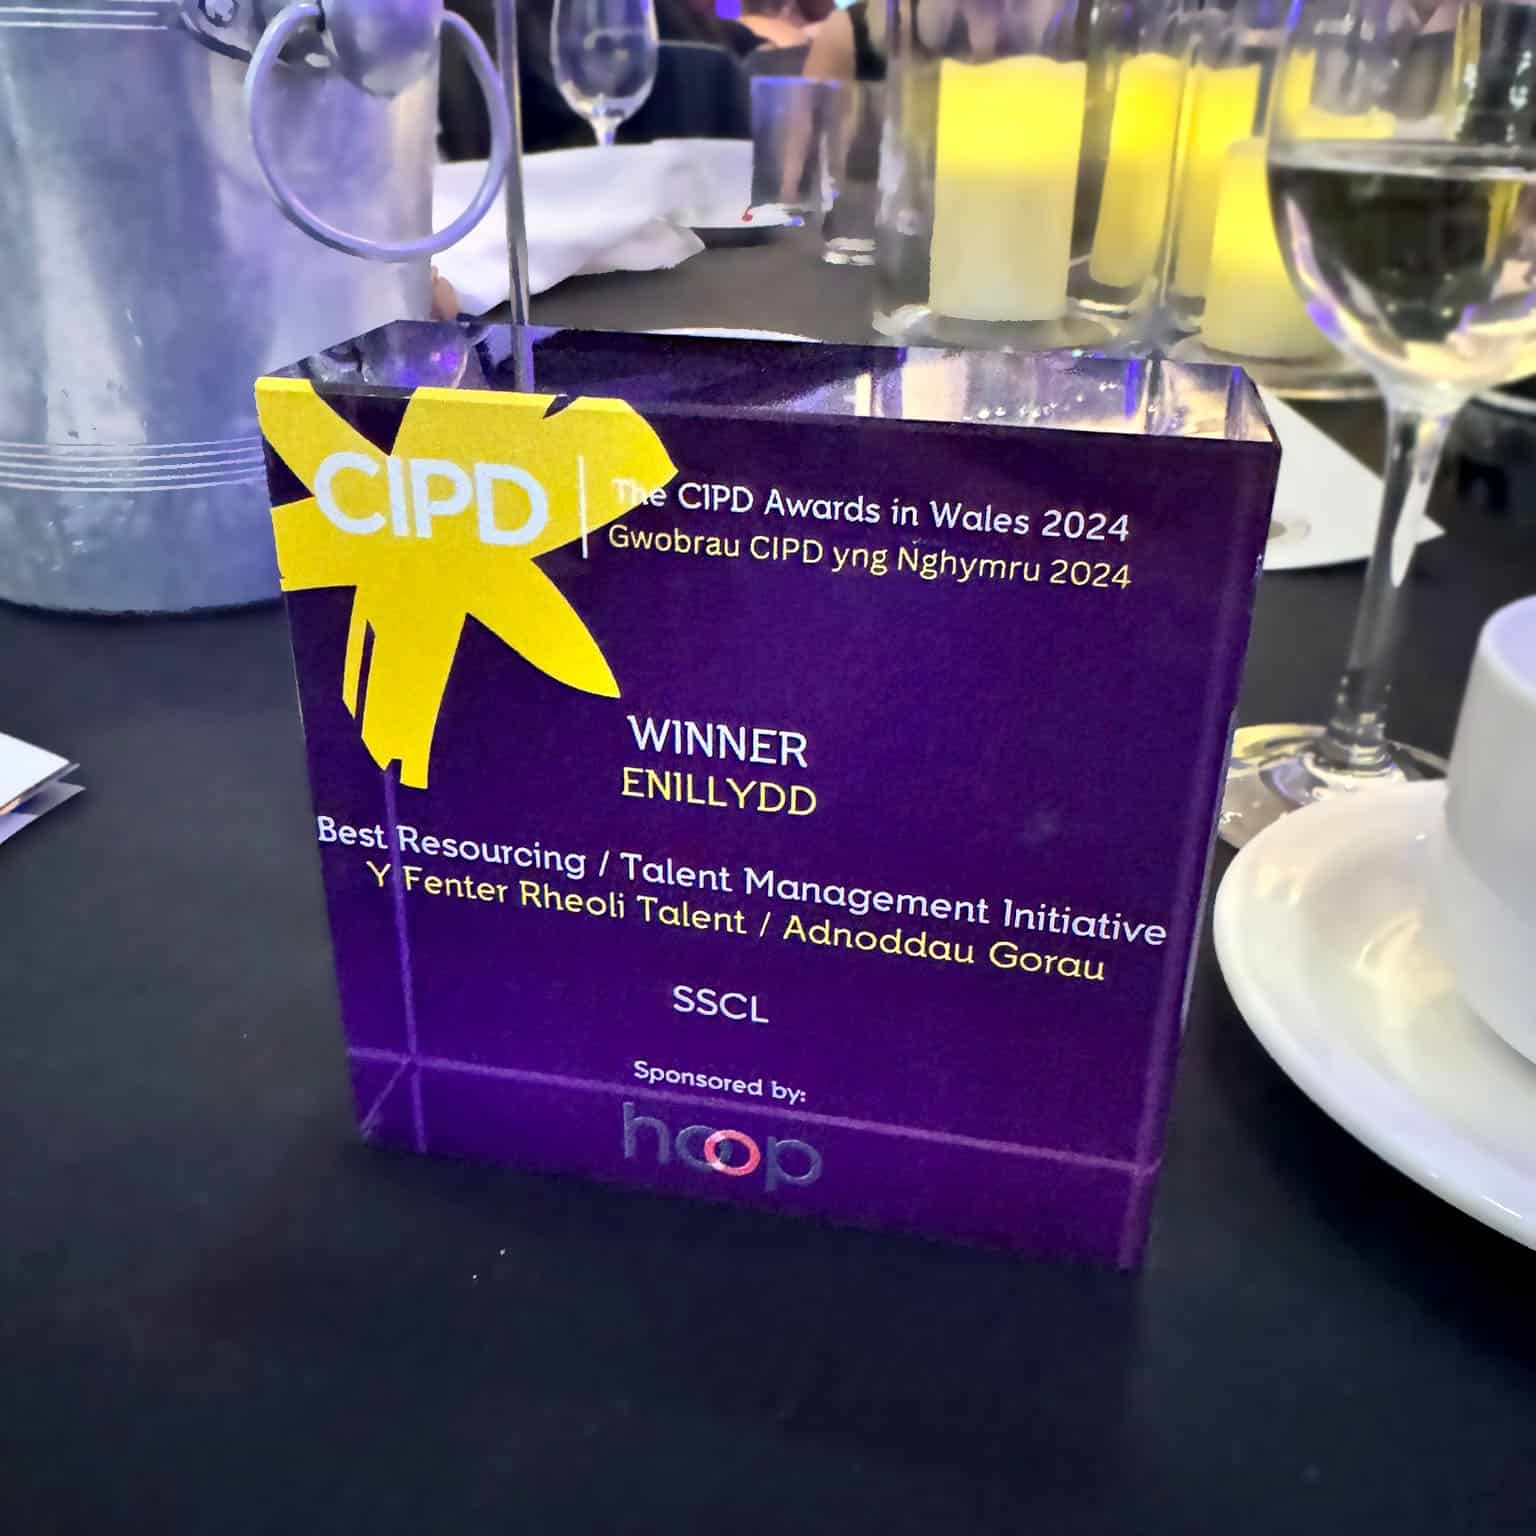 SSCL and the UK Home Office win Best Resourcing Initiative at CIPD Wales Awards 2024.